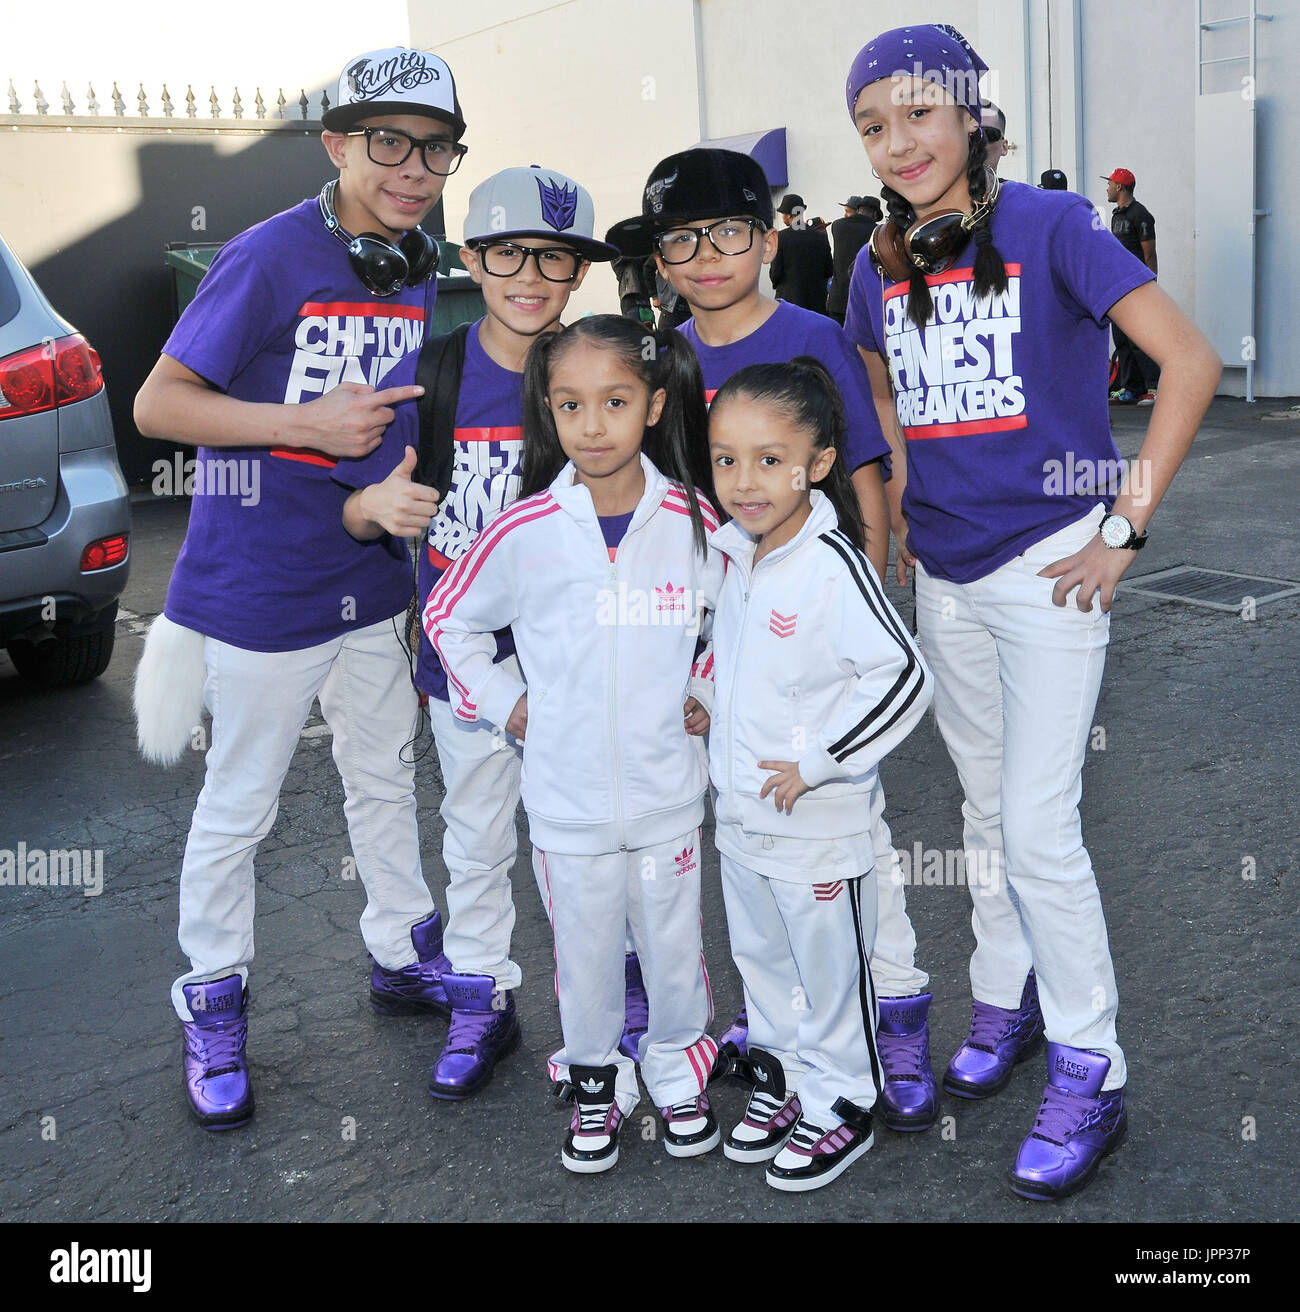 Chi-Town Finest Breakers at Randy Jackson's America's Best Dance Crew Season 7 Season Of The Superstars - Los Angeles Auditions at Center Staging in Burbank, CA. The event took place on Saturday, January 28, 2012. Photo by Sthanlee B. Mirador Pacific Rim Photo Press. Stock Photo